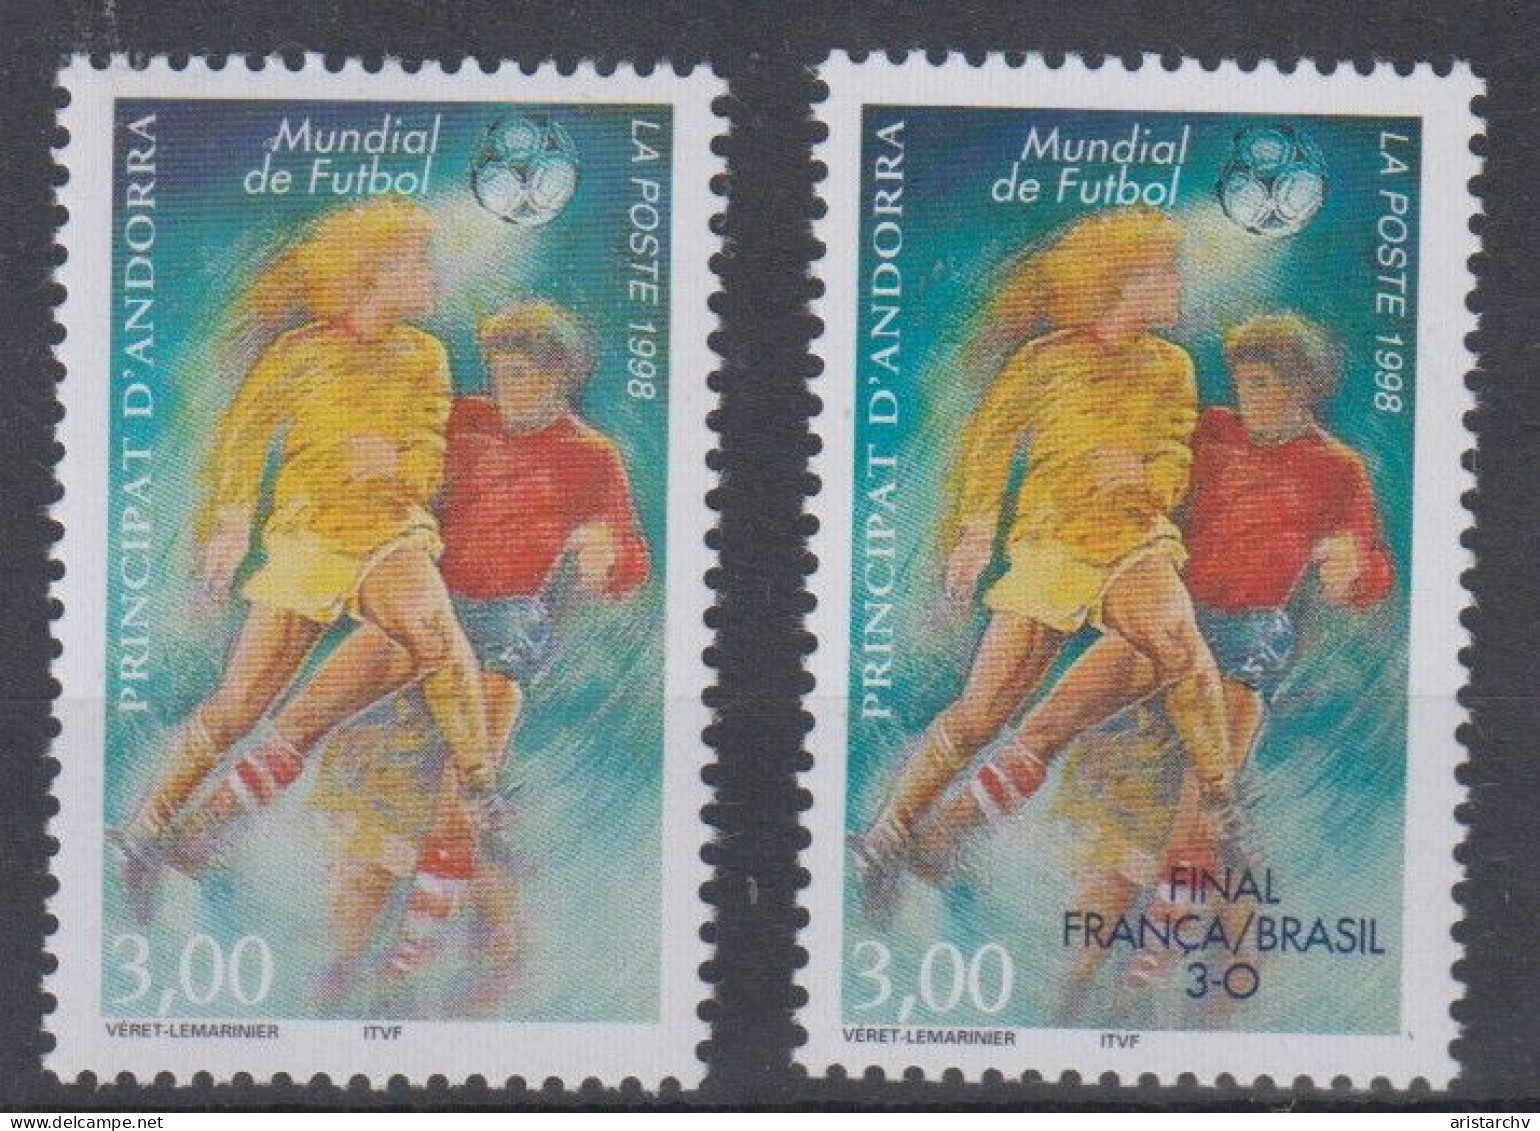 ANDORRA 1998 FOOTBALL WORLD CUP 2 STAMPS 1 OVERPRINT - 1998 – Frankreich